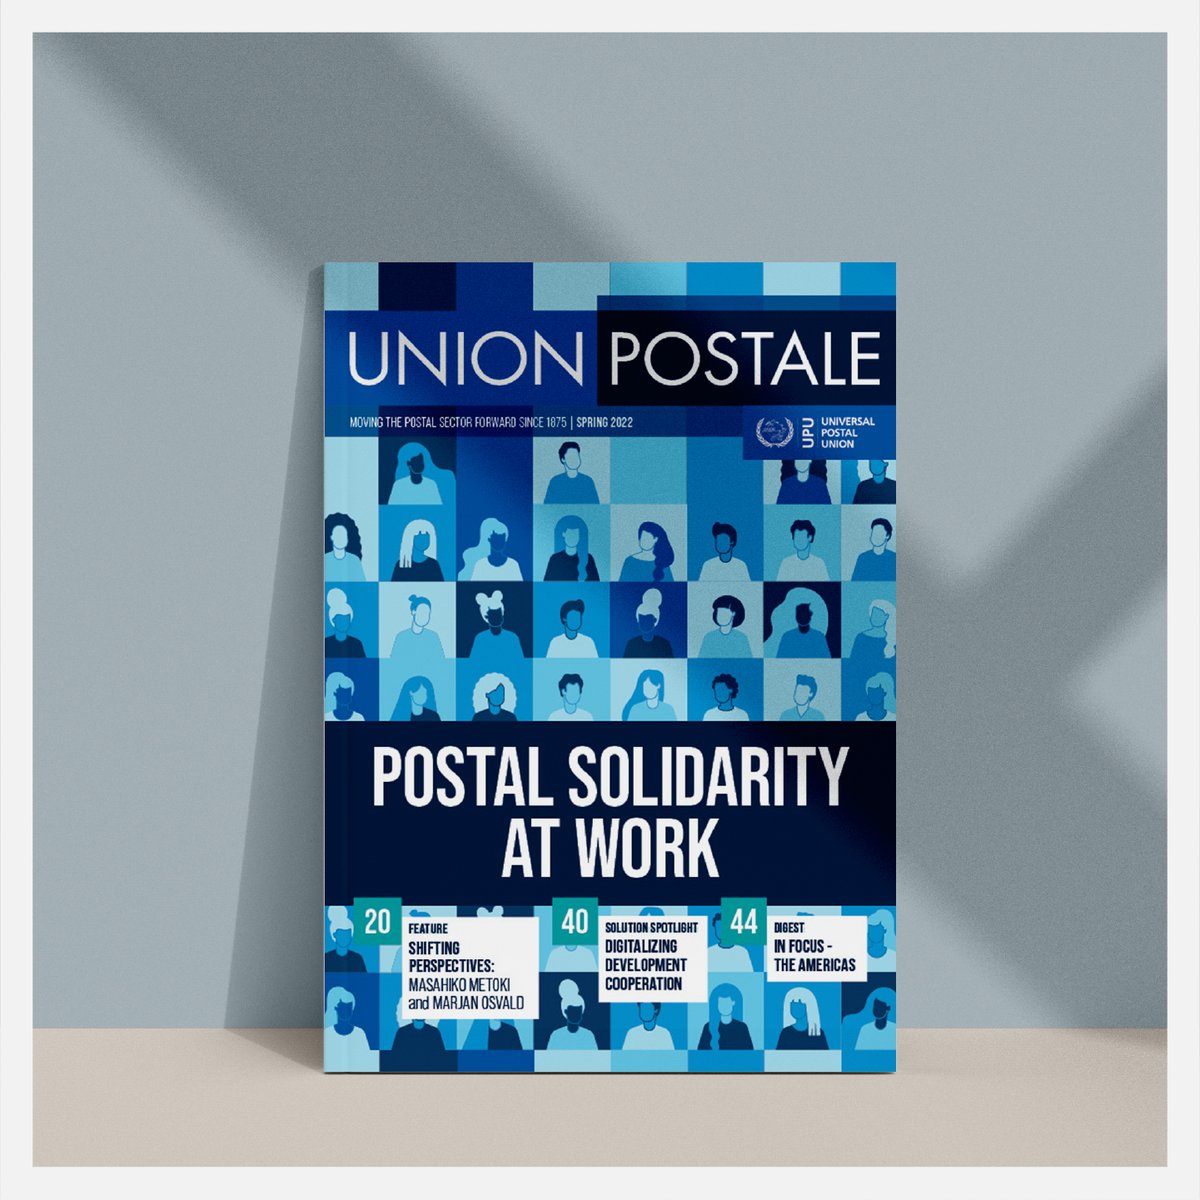 💻Welcome the fresh edition of the UPU's flagship magazine #UnionPostale!

💡In the 1st issue of the Abidjan cycle: digitalizing #development cooperation, mobilizing postal #solidarity and leading by listening.

Download your full digital copy here👉bit.ly/3IB2QXi